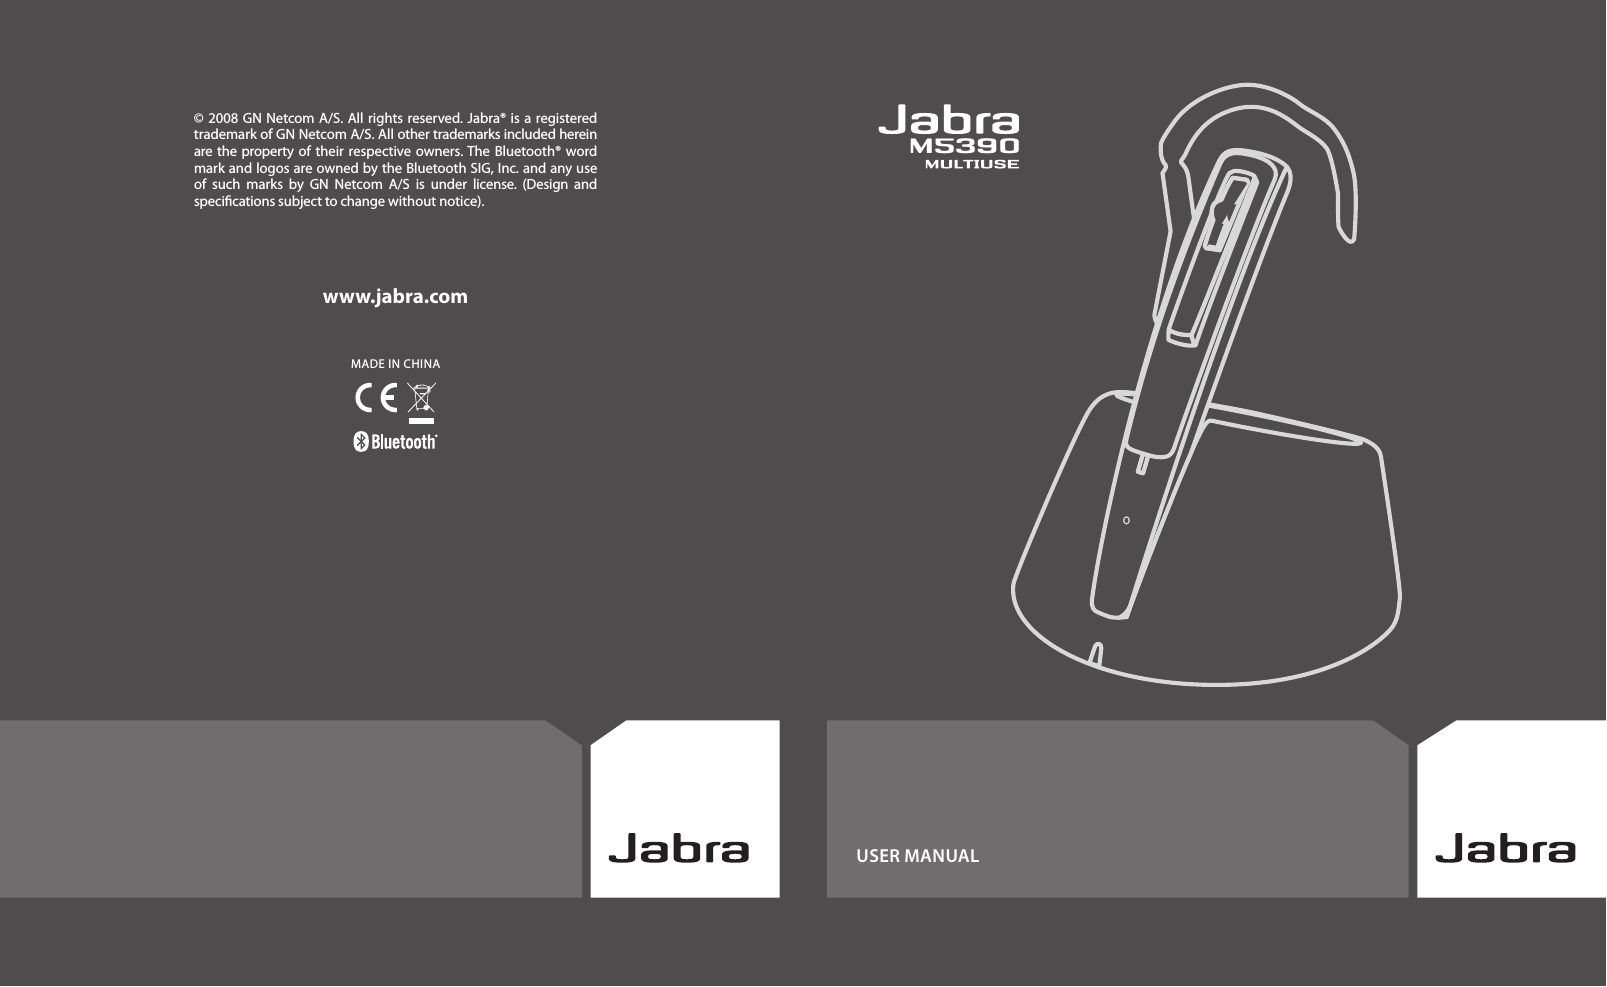 www.jabra.comMADE IN CHINAUSER MANUALM5390© 2008 GN Netcom A/S.  All  rights  reserved. Jabra® is a registered trademark of GN Netcom A/S. All other trademarks included herein  are  the property  of  their respective  owners. The  Bluetooth®  word  mark and logos are owned by the Bluetooth SIG, Inc. and any use  of  such  marks  by  GN  Netcom  A/S  is  under  license.  (Design  and  speciﬁcations subject to change without notice).